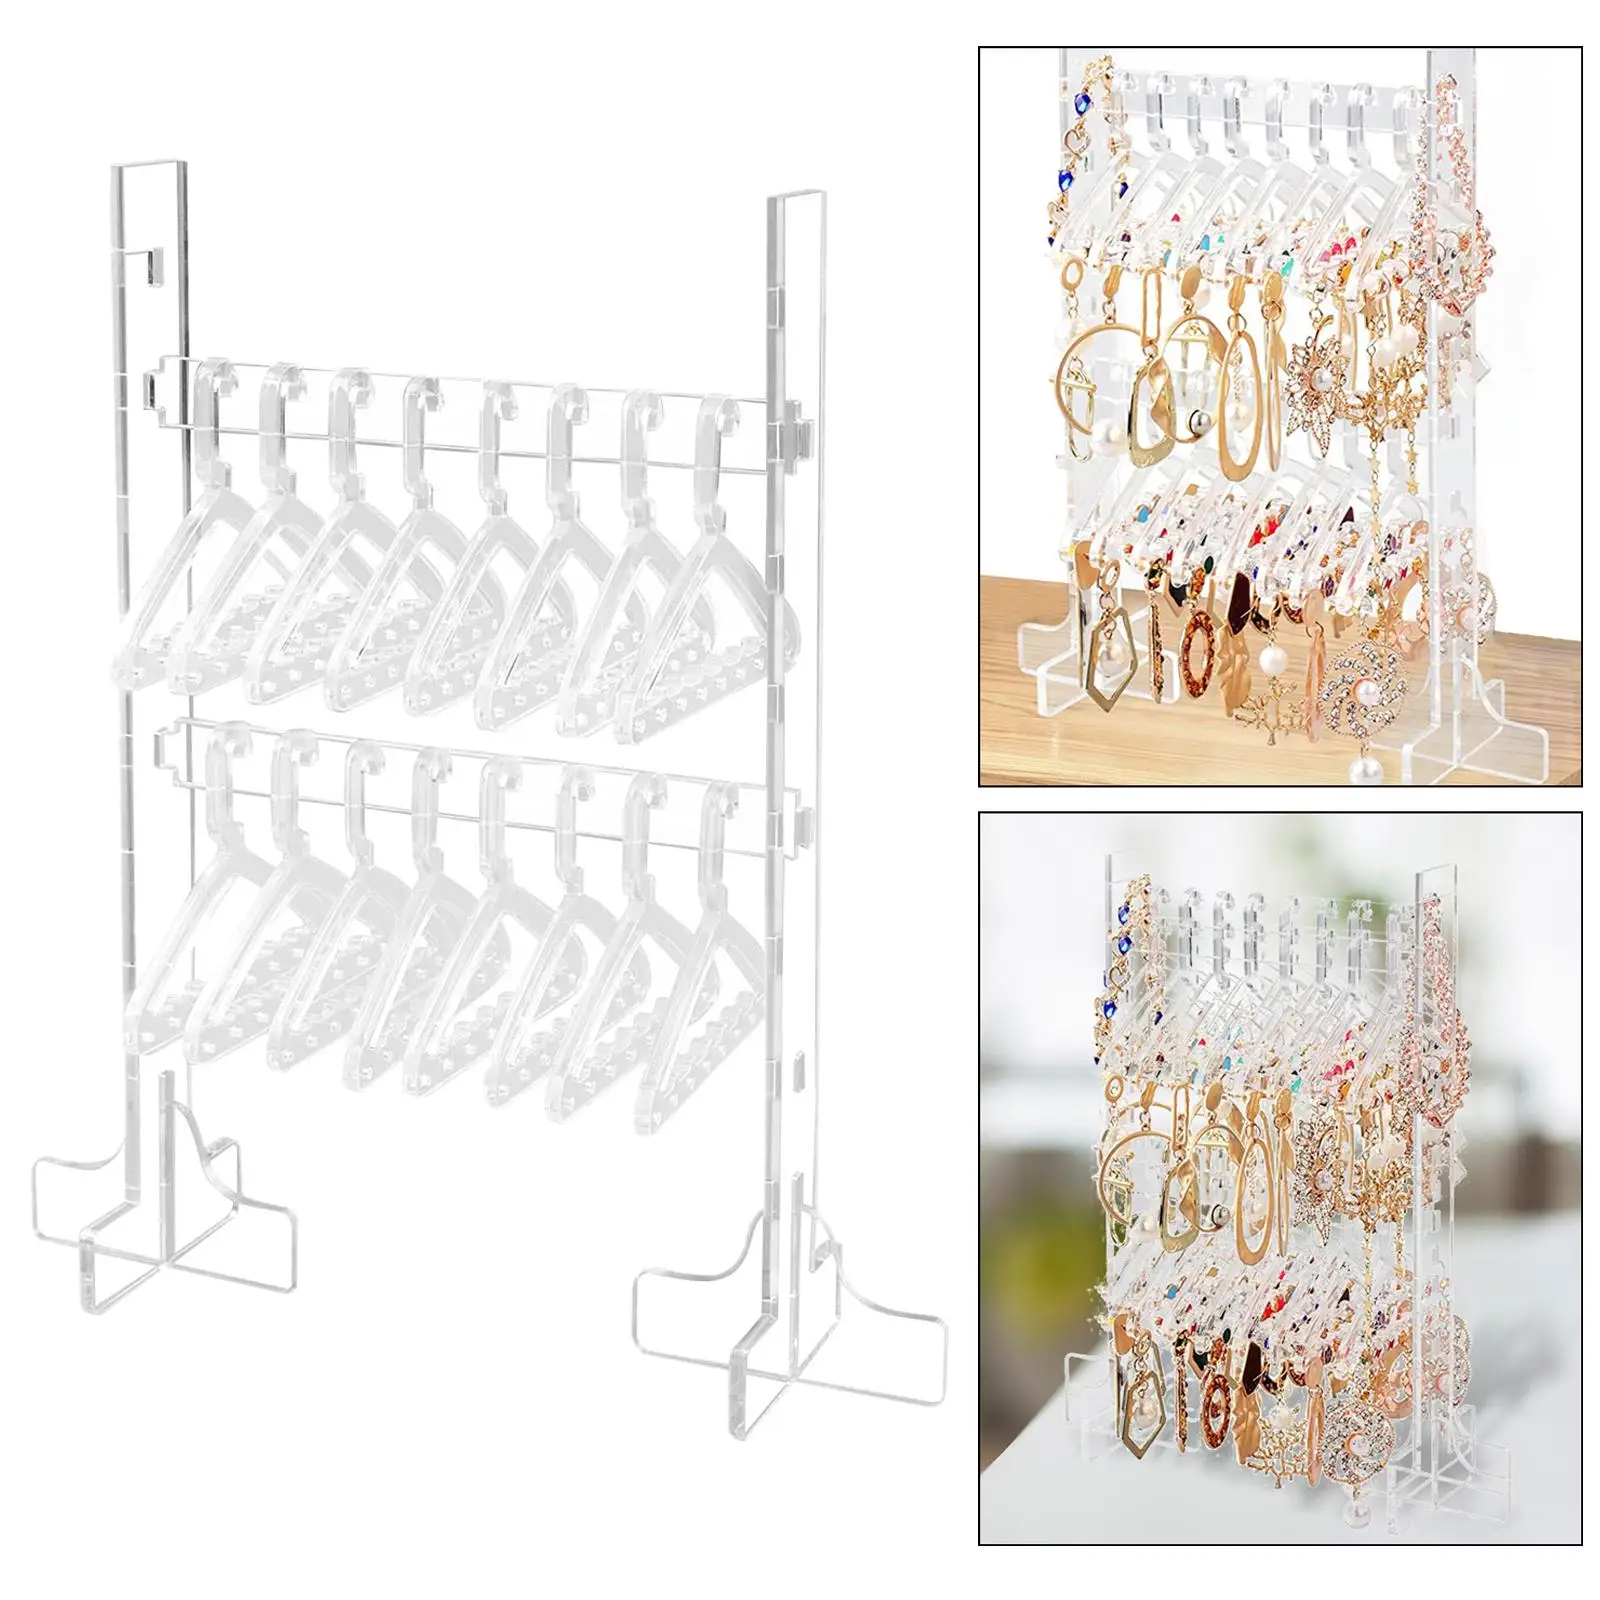 ear Stud Display Stand 128 Holes Jewelry Storage Holder Photography Props Earring Hanger Rack for Living Room Tabletop